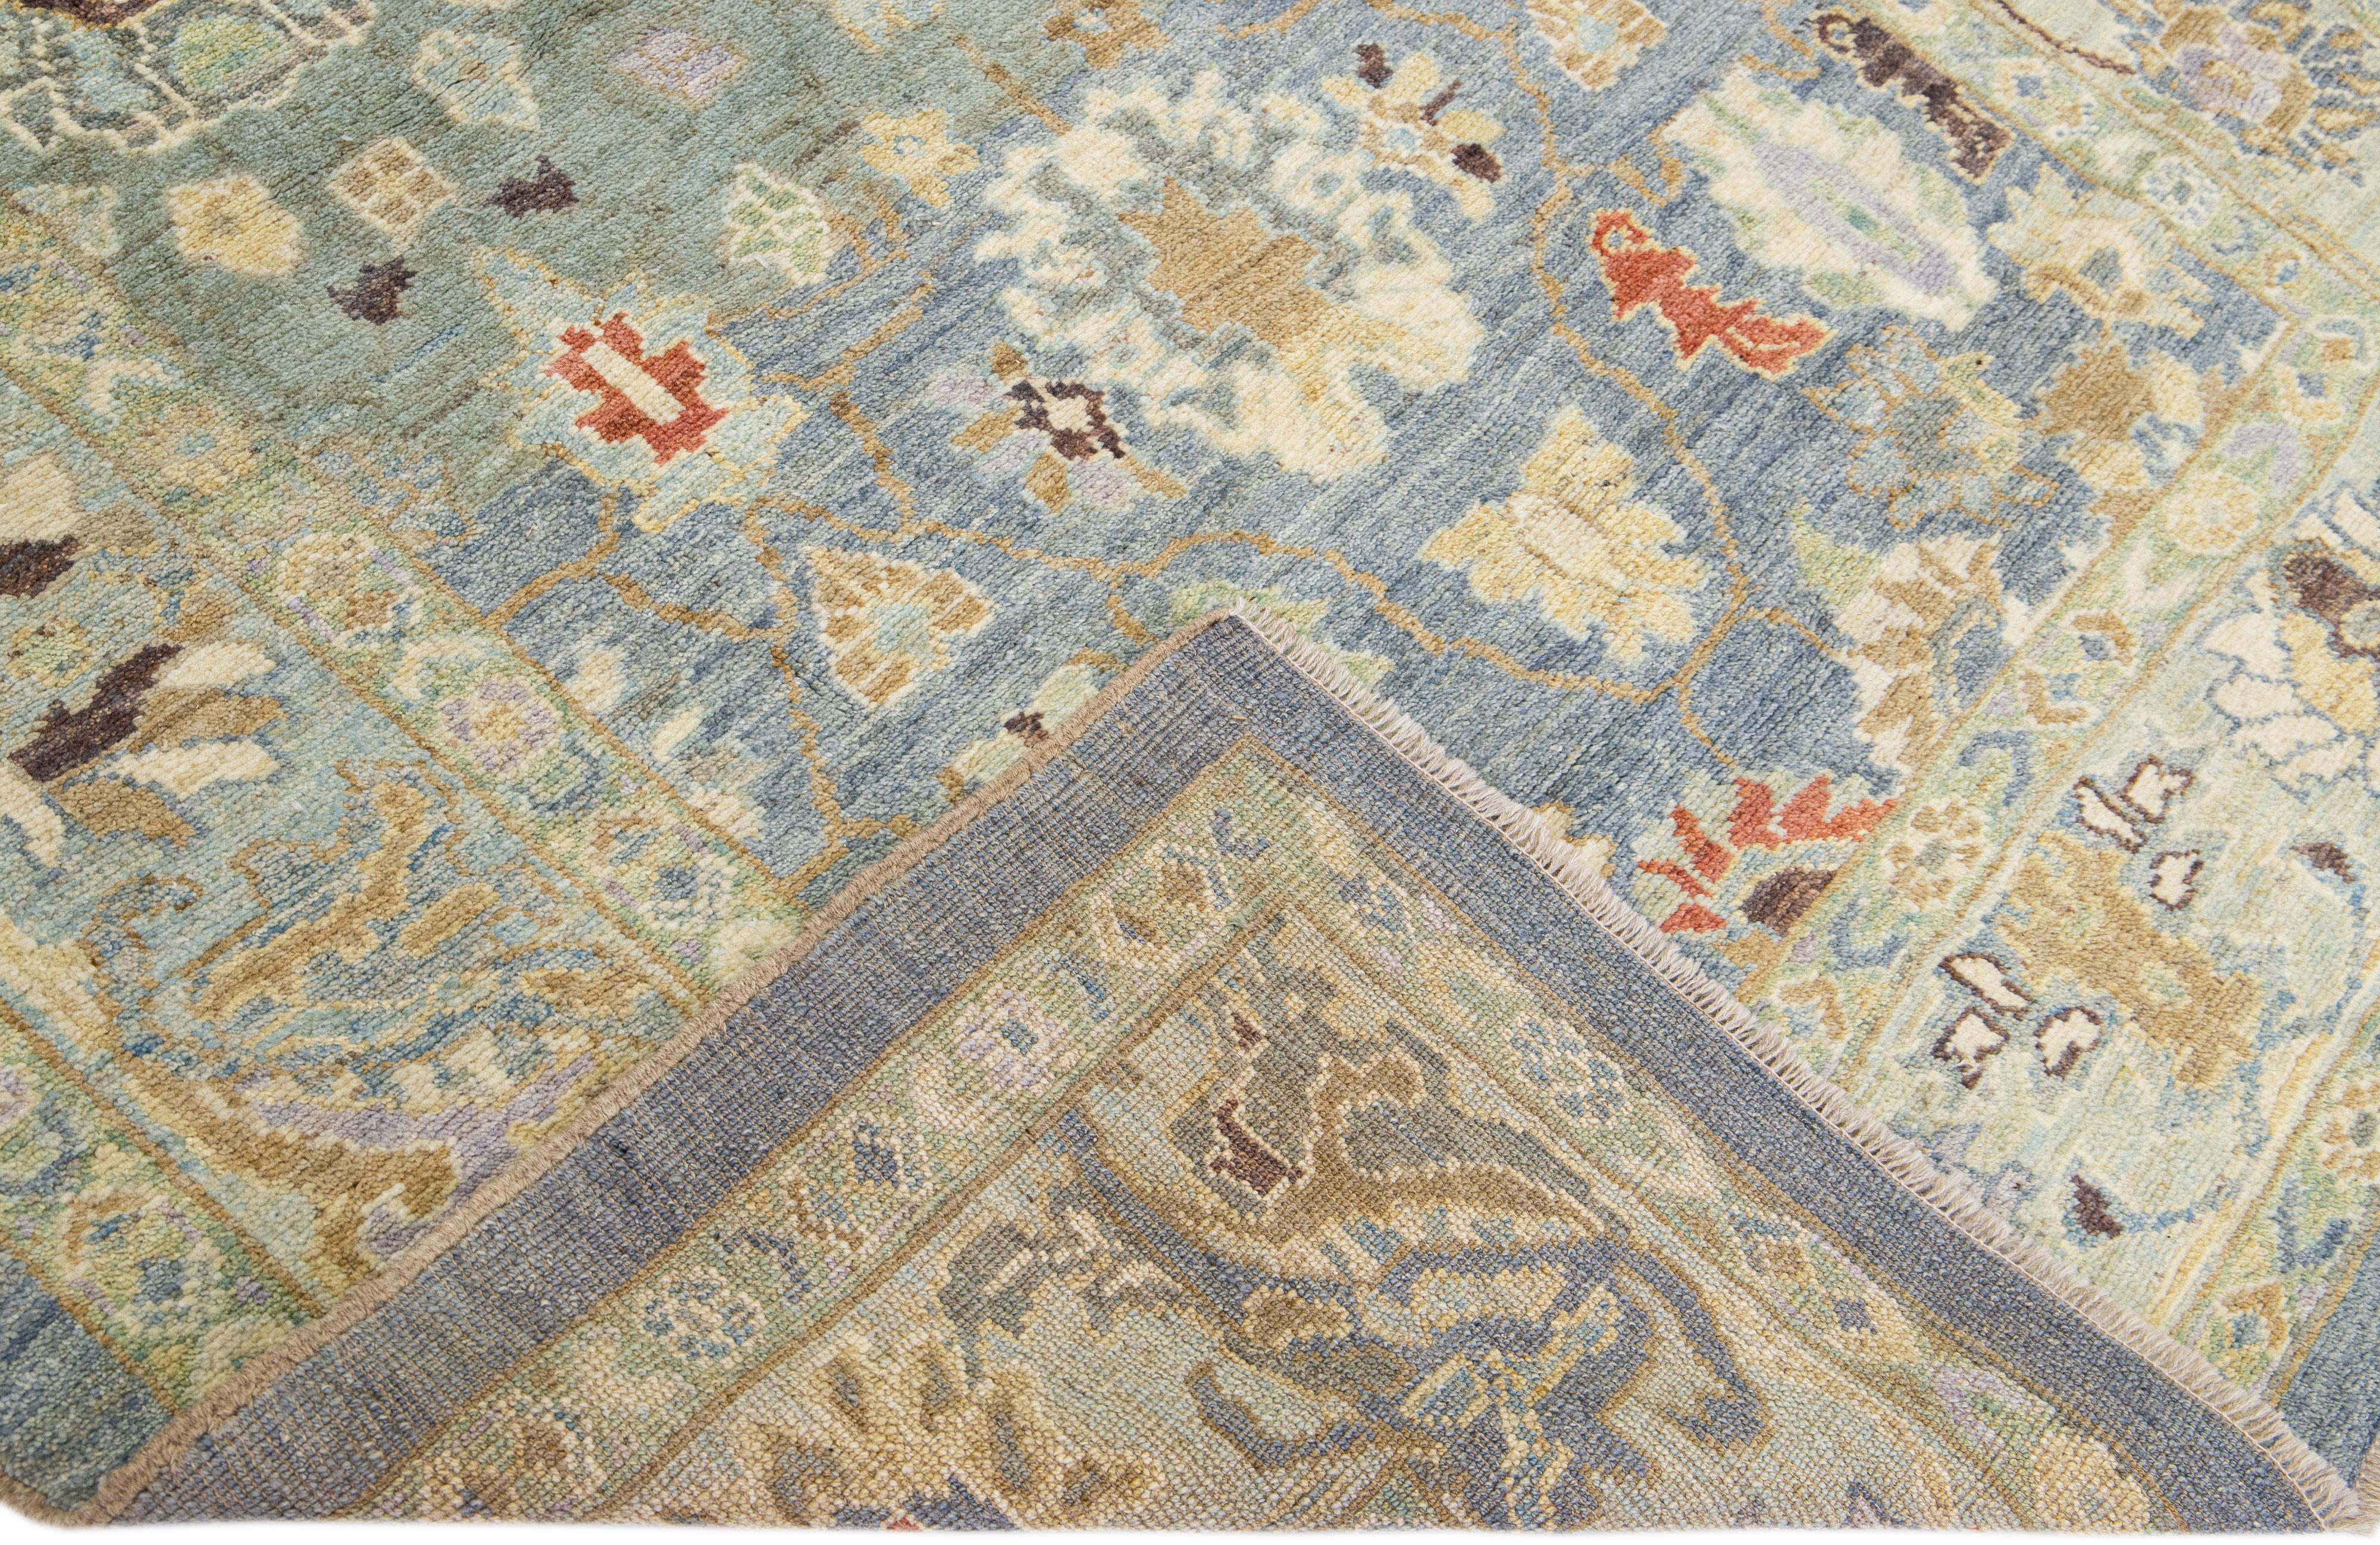 Beautiful modern Sultanabad hand-knotted wool rug with a blue field. This Sultanabad rug has a green frame and multicolor accents in a gorgeous all-over classic floral pattern design.

This rug measures: 5'9